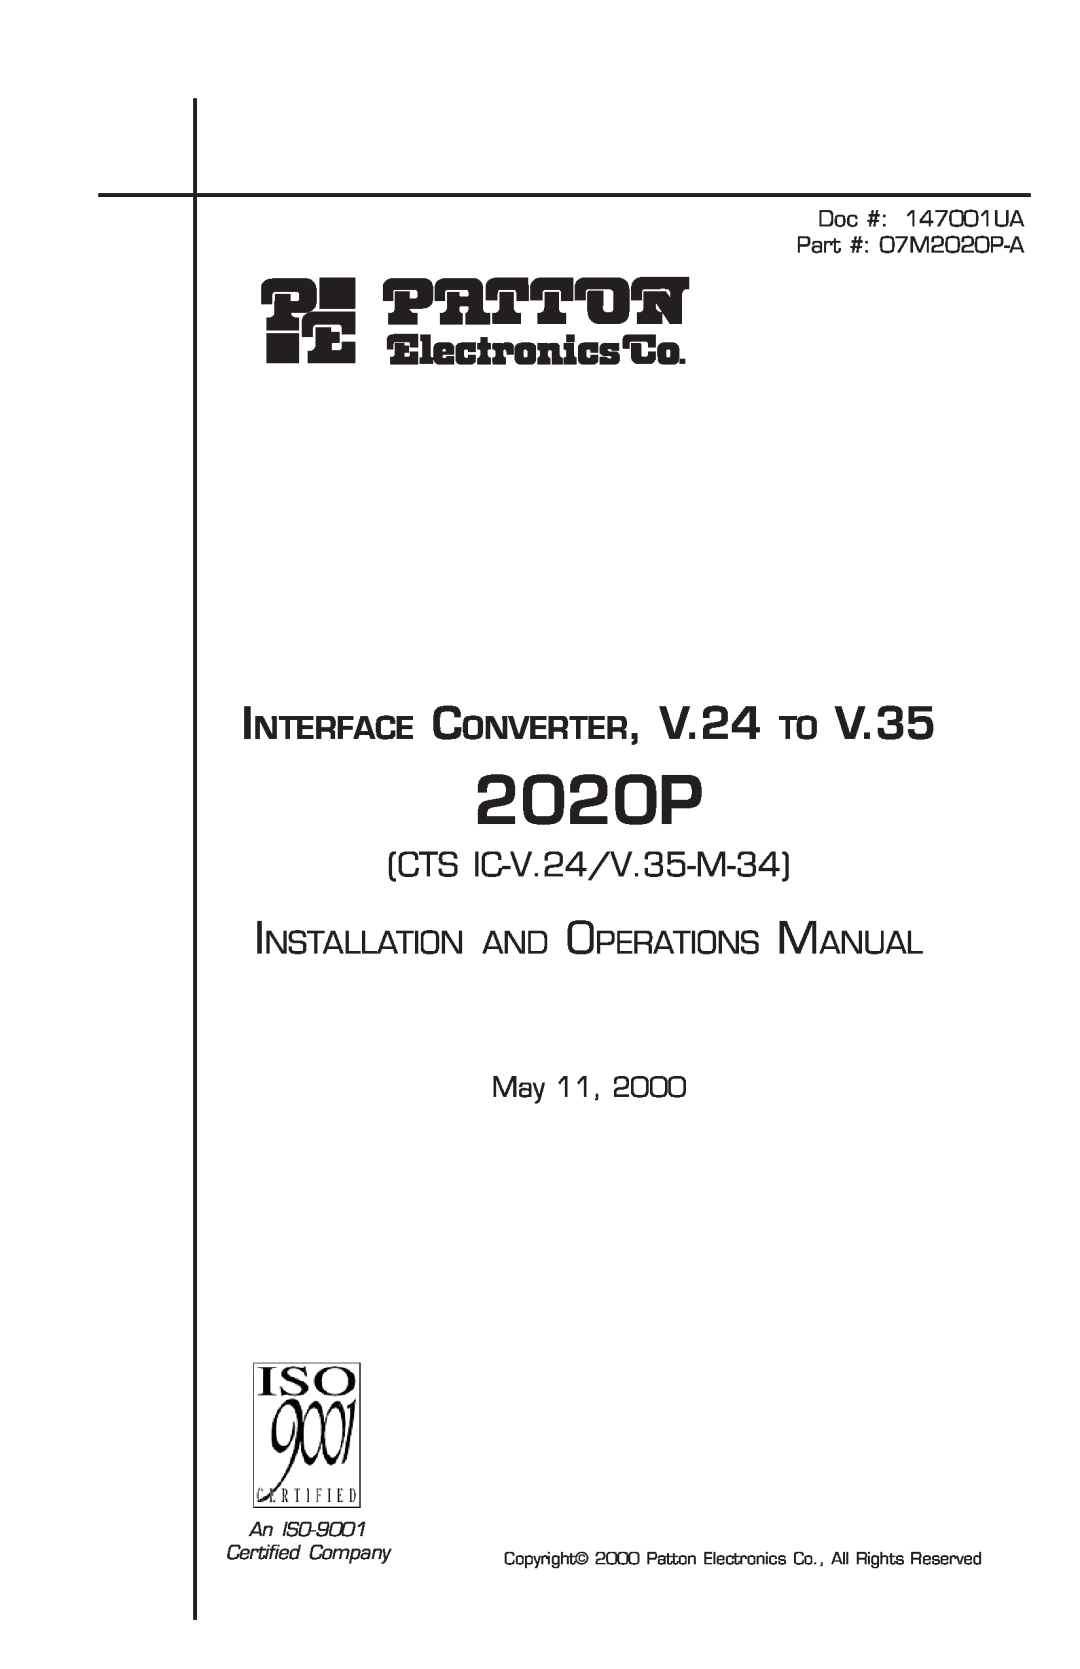 Patton electronic manual CTS IC-V.24/V.35-M-34, May 11, Doc # 147001UA 07M2020P-A, An ISO-9001, Certified Company 